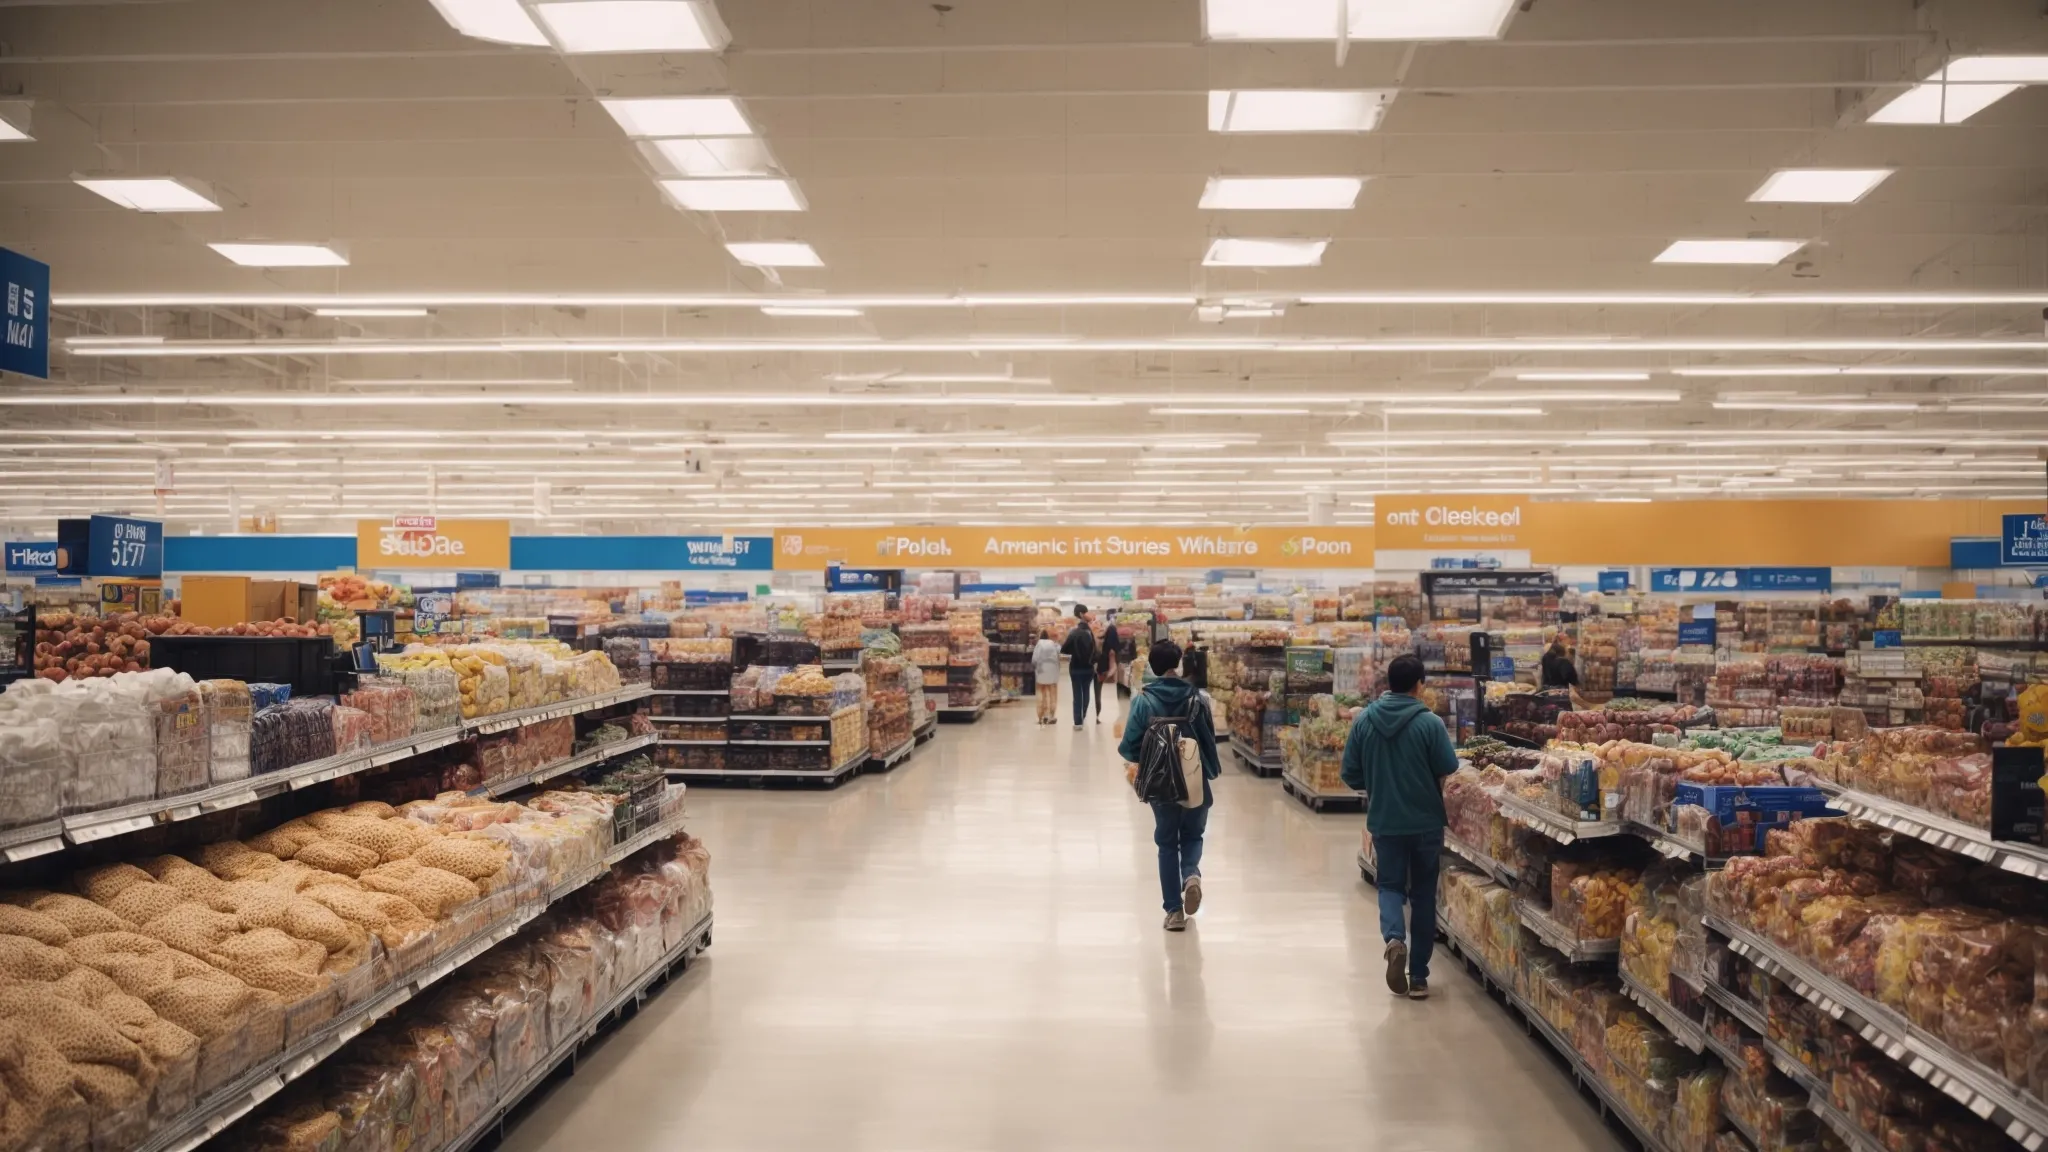 a wide interior view of a bustling walmart store with prominent signage and organized aisles.